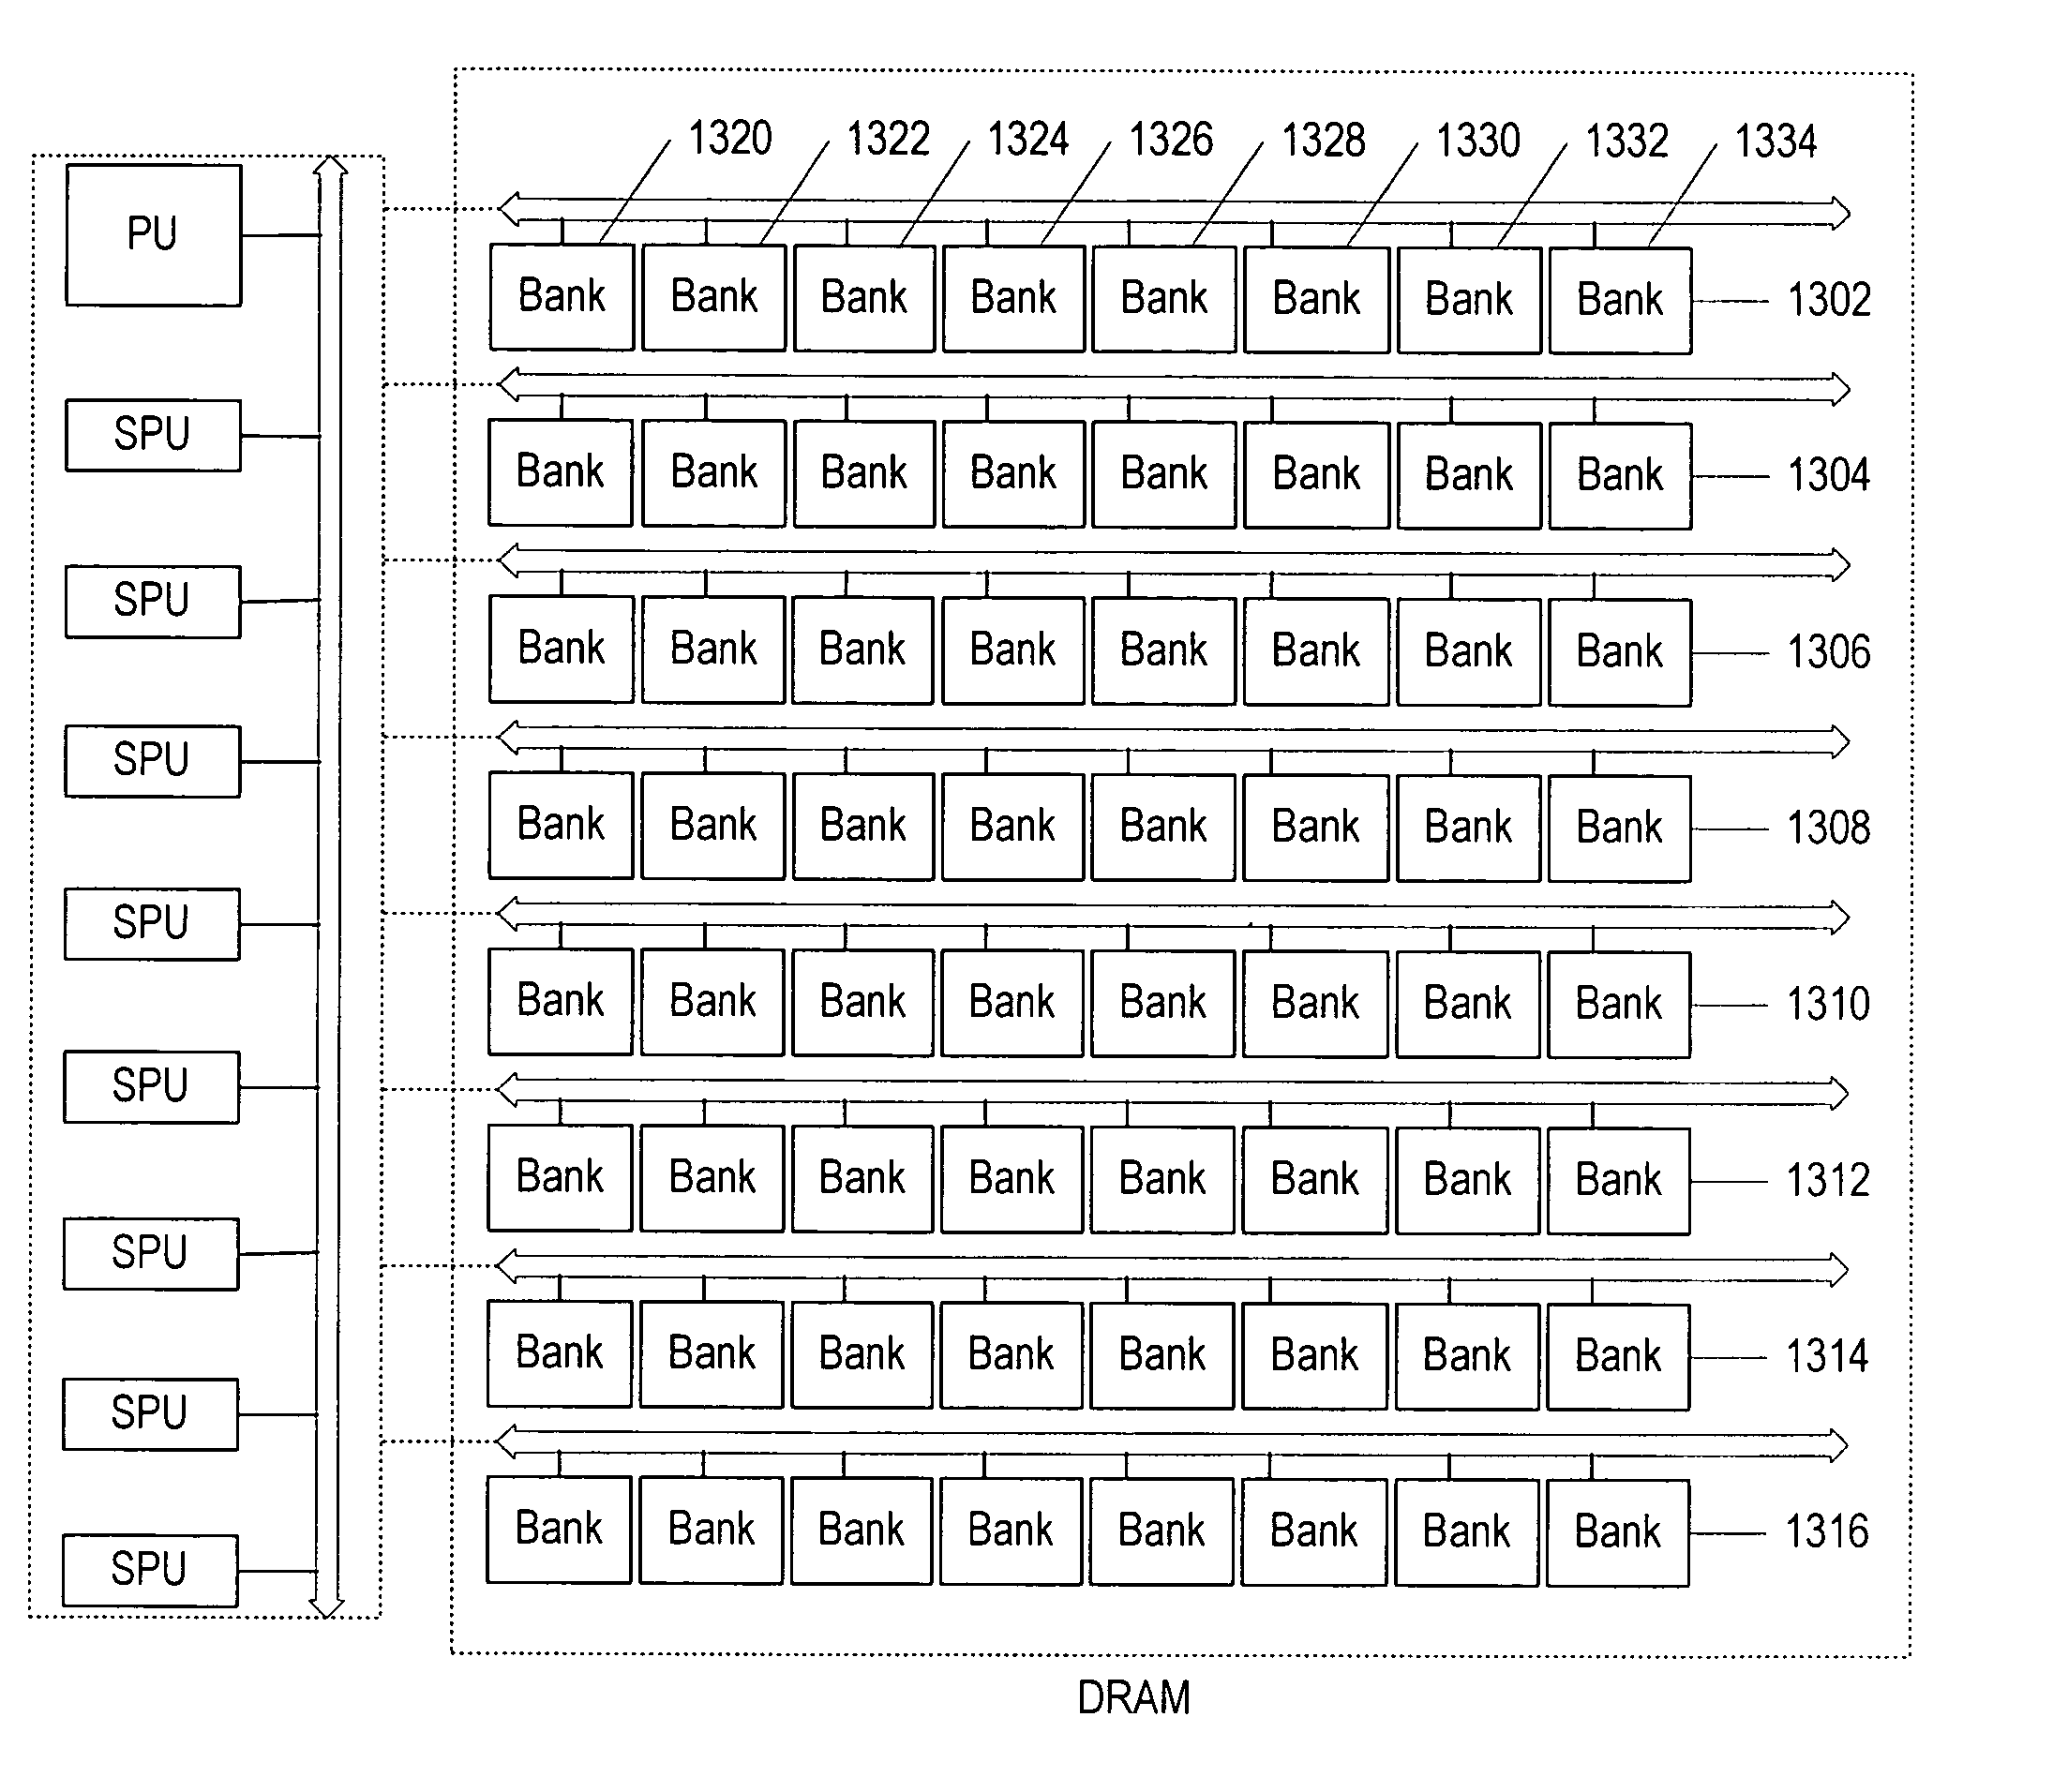 System and method for sharing memory by Heterogen ous processors